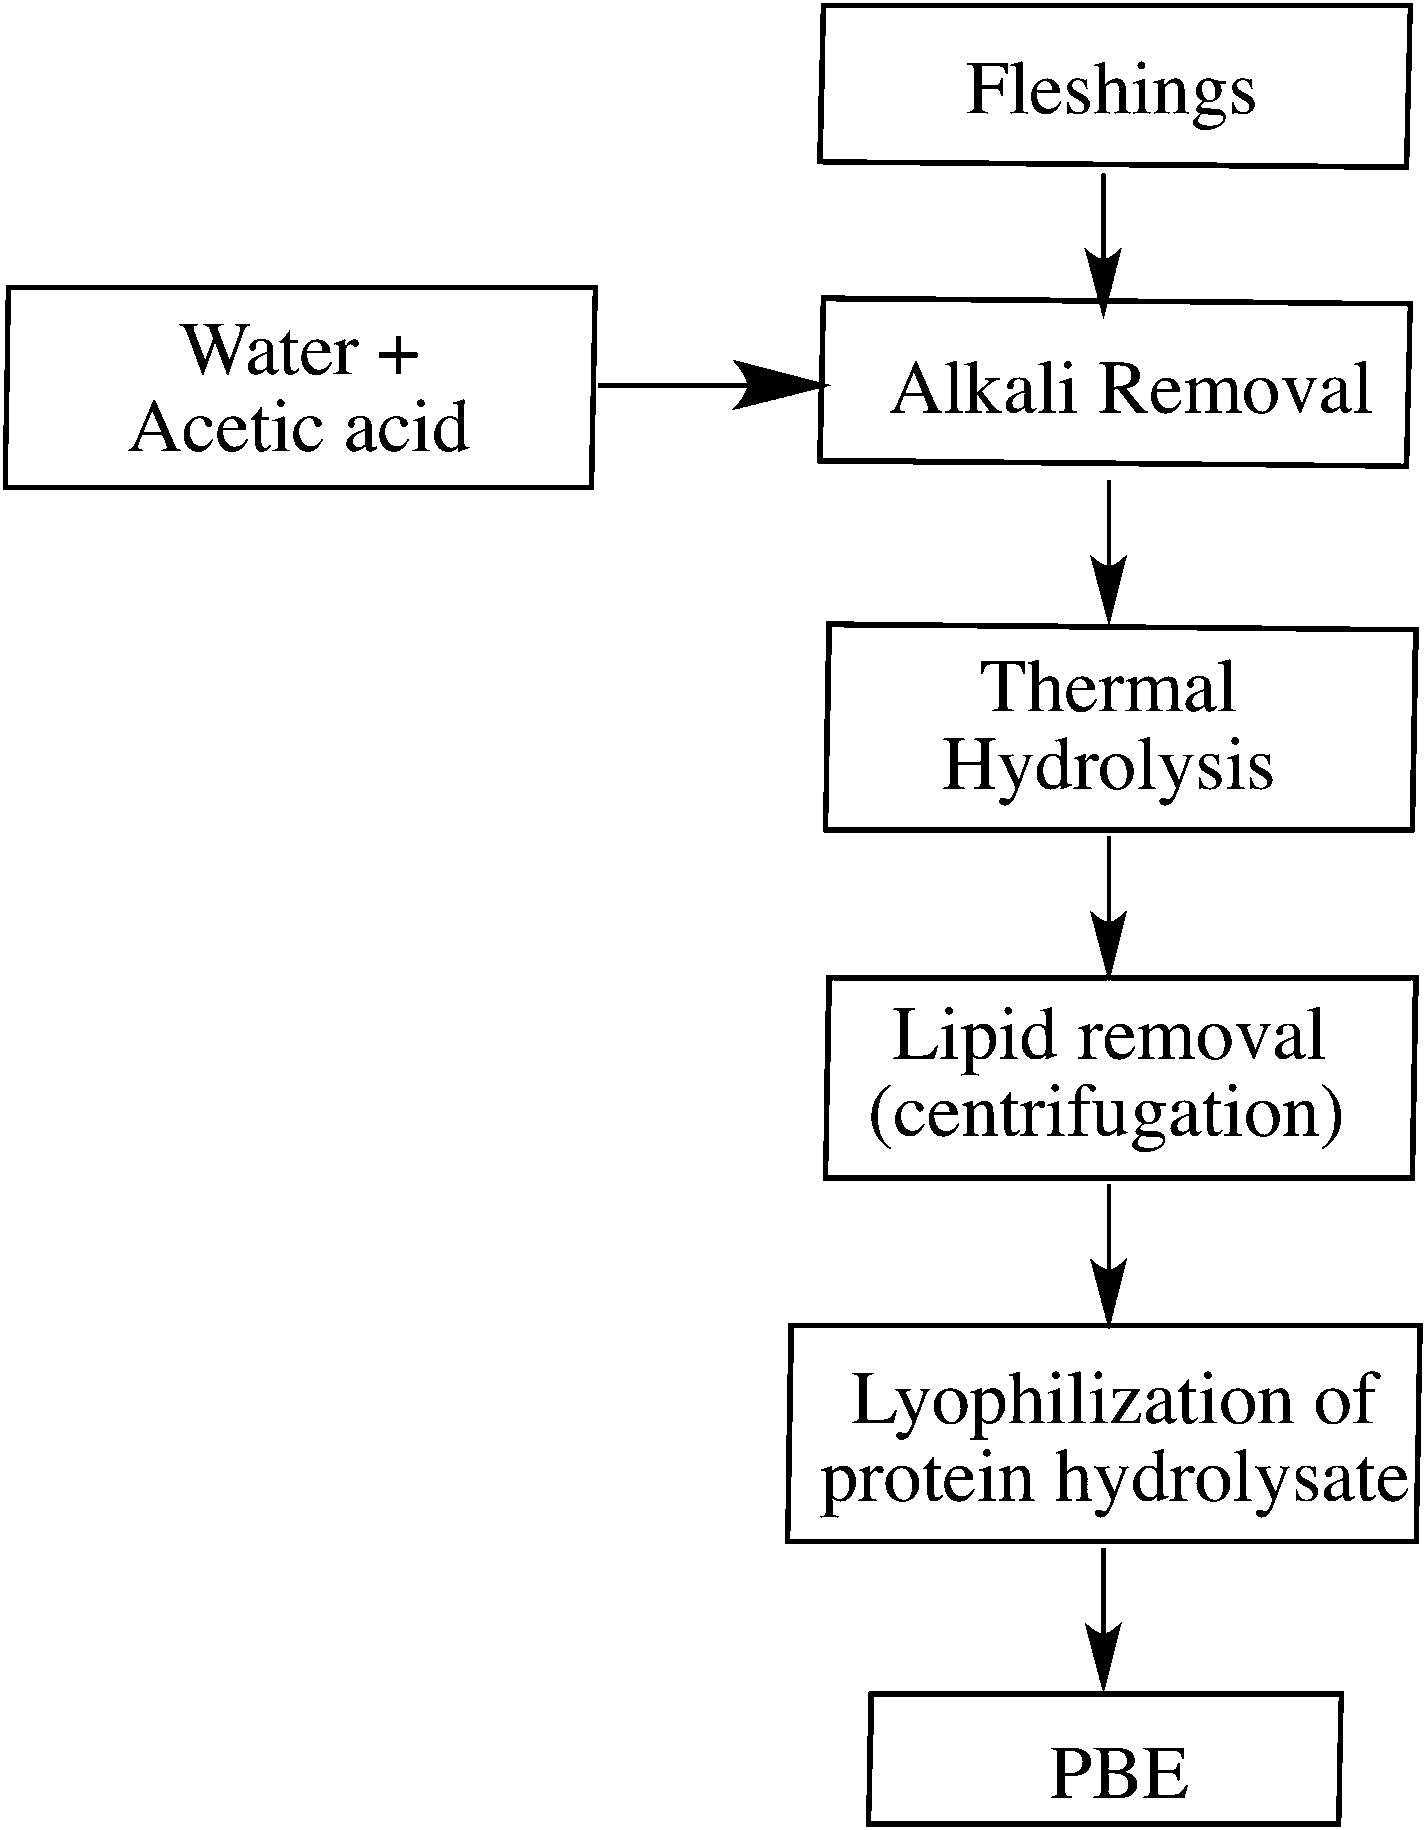 Leather Tanning Process Flow Chart